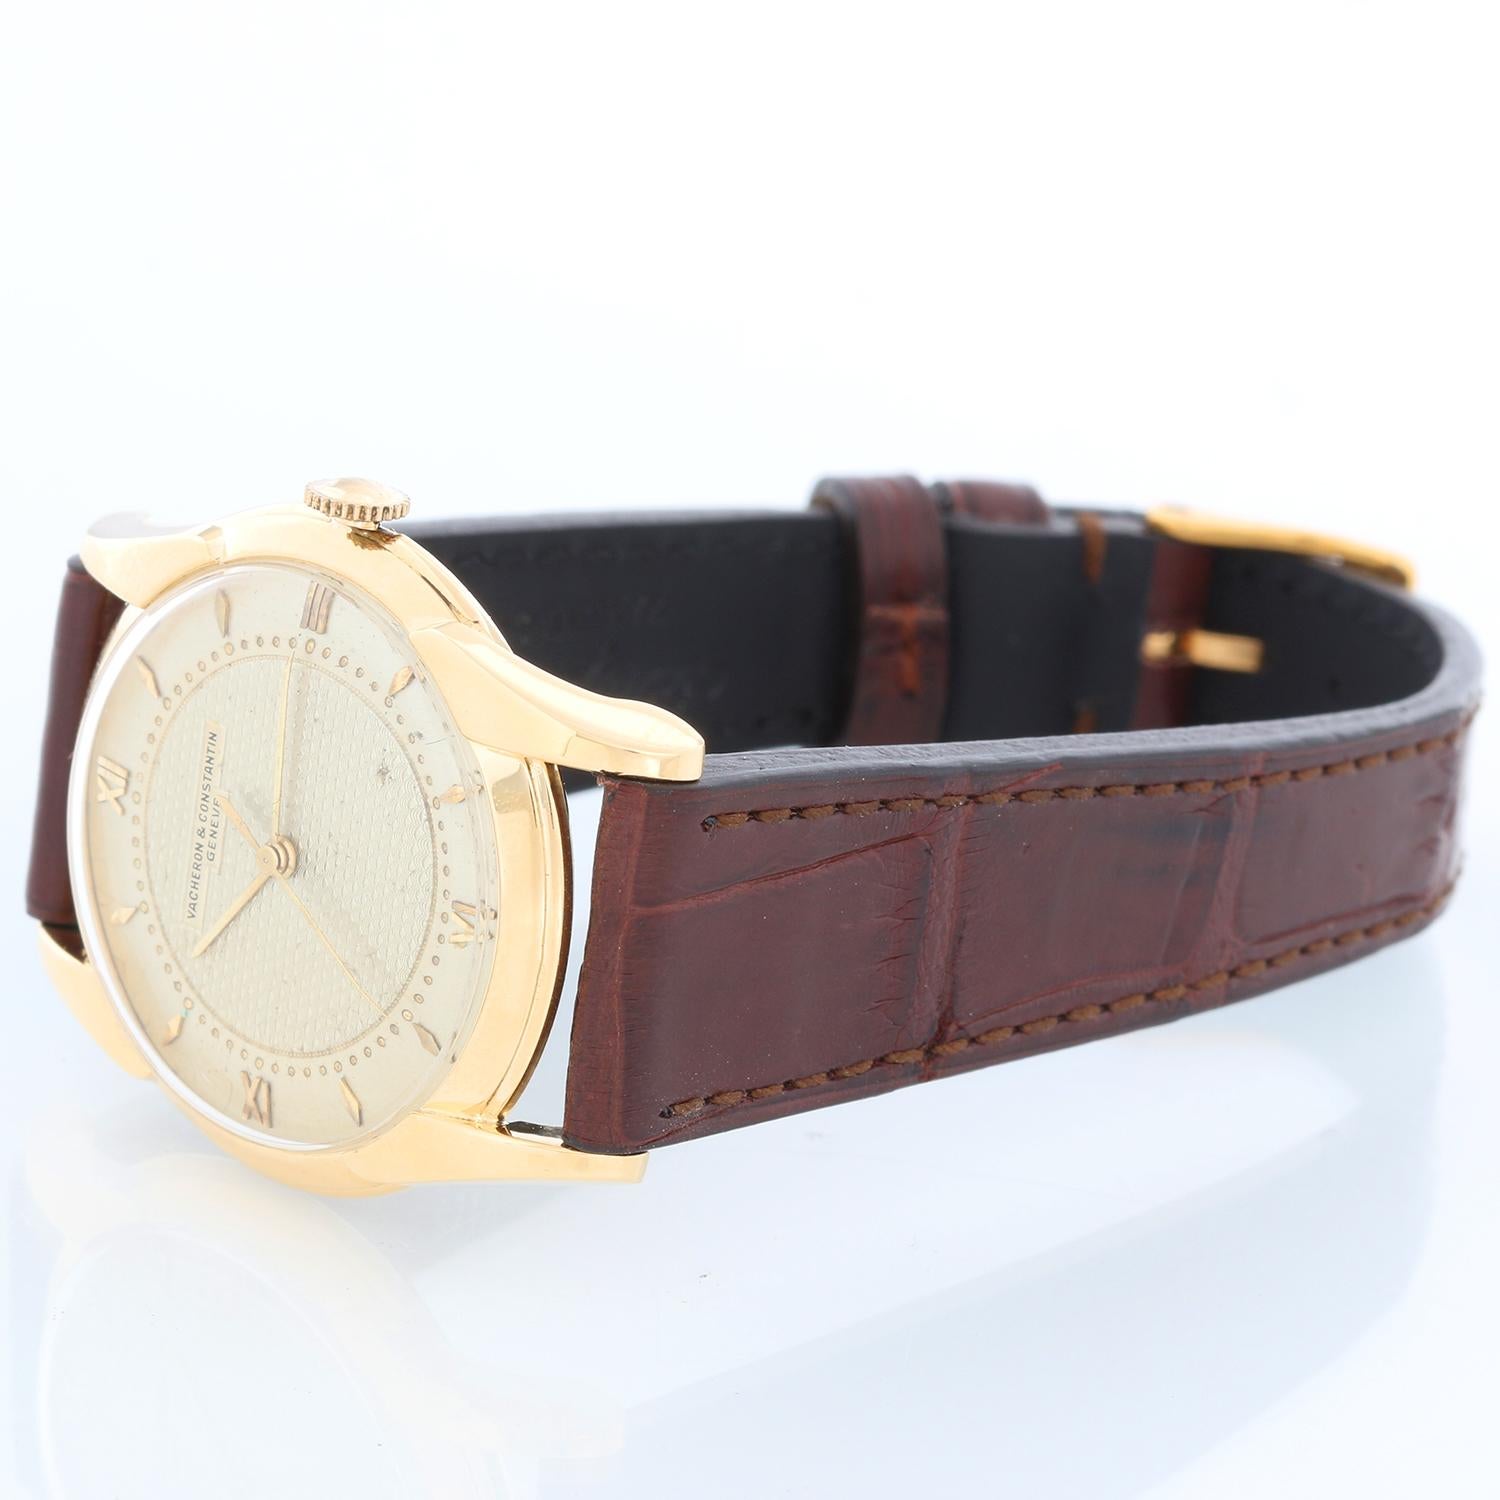 Vacheron Constantin 18K Yellow Gold  Vintage Men's Watch - Manual winding . 18K  Yellow gold ( 33 mm ) . Silver dial with guilloche middle . Brown strap band with buckle . Pre-owned with custom box.